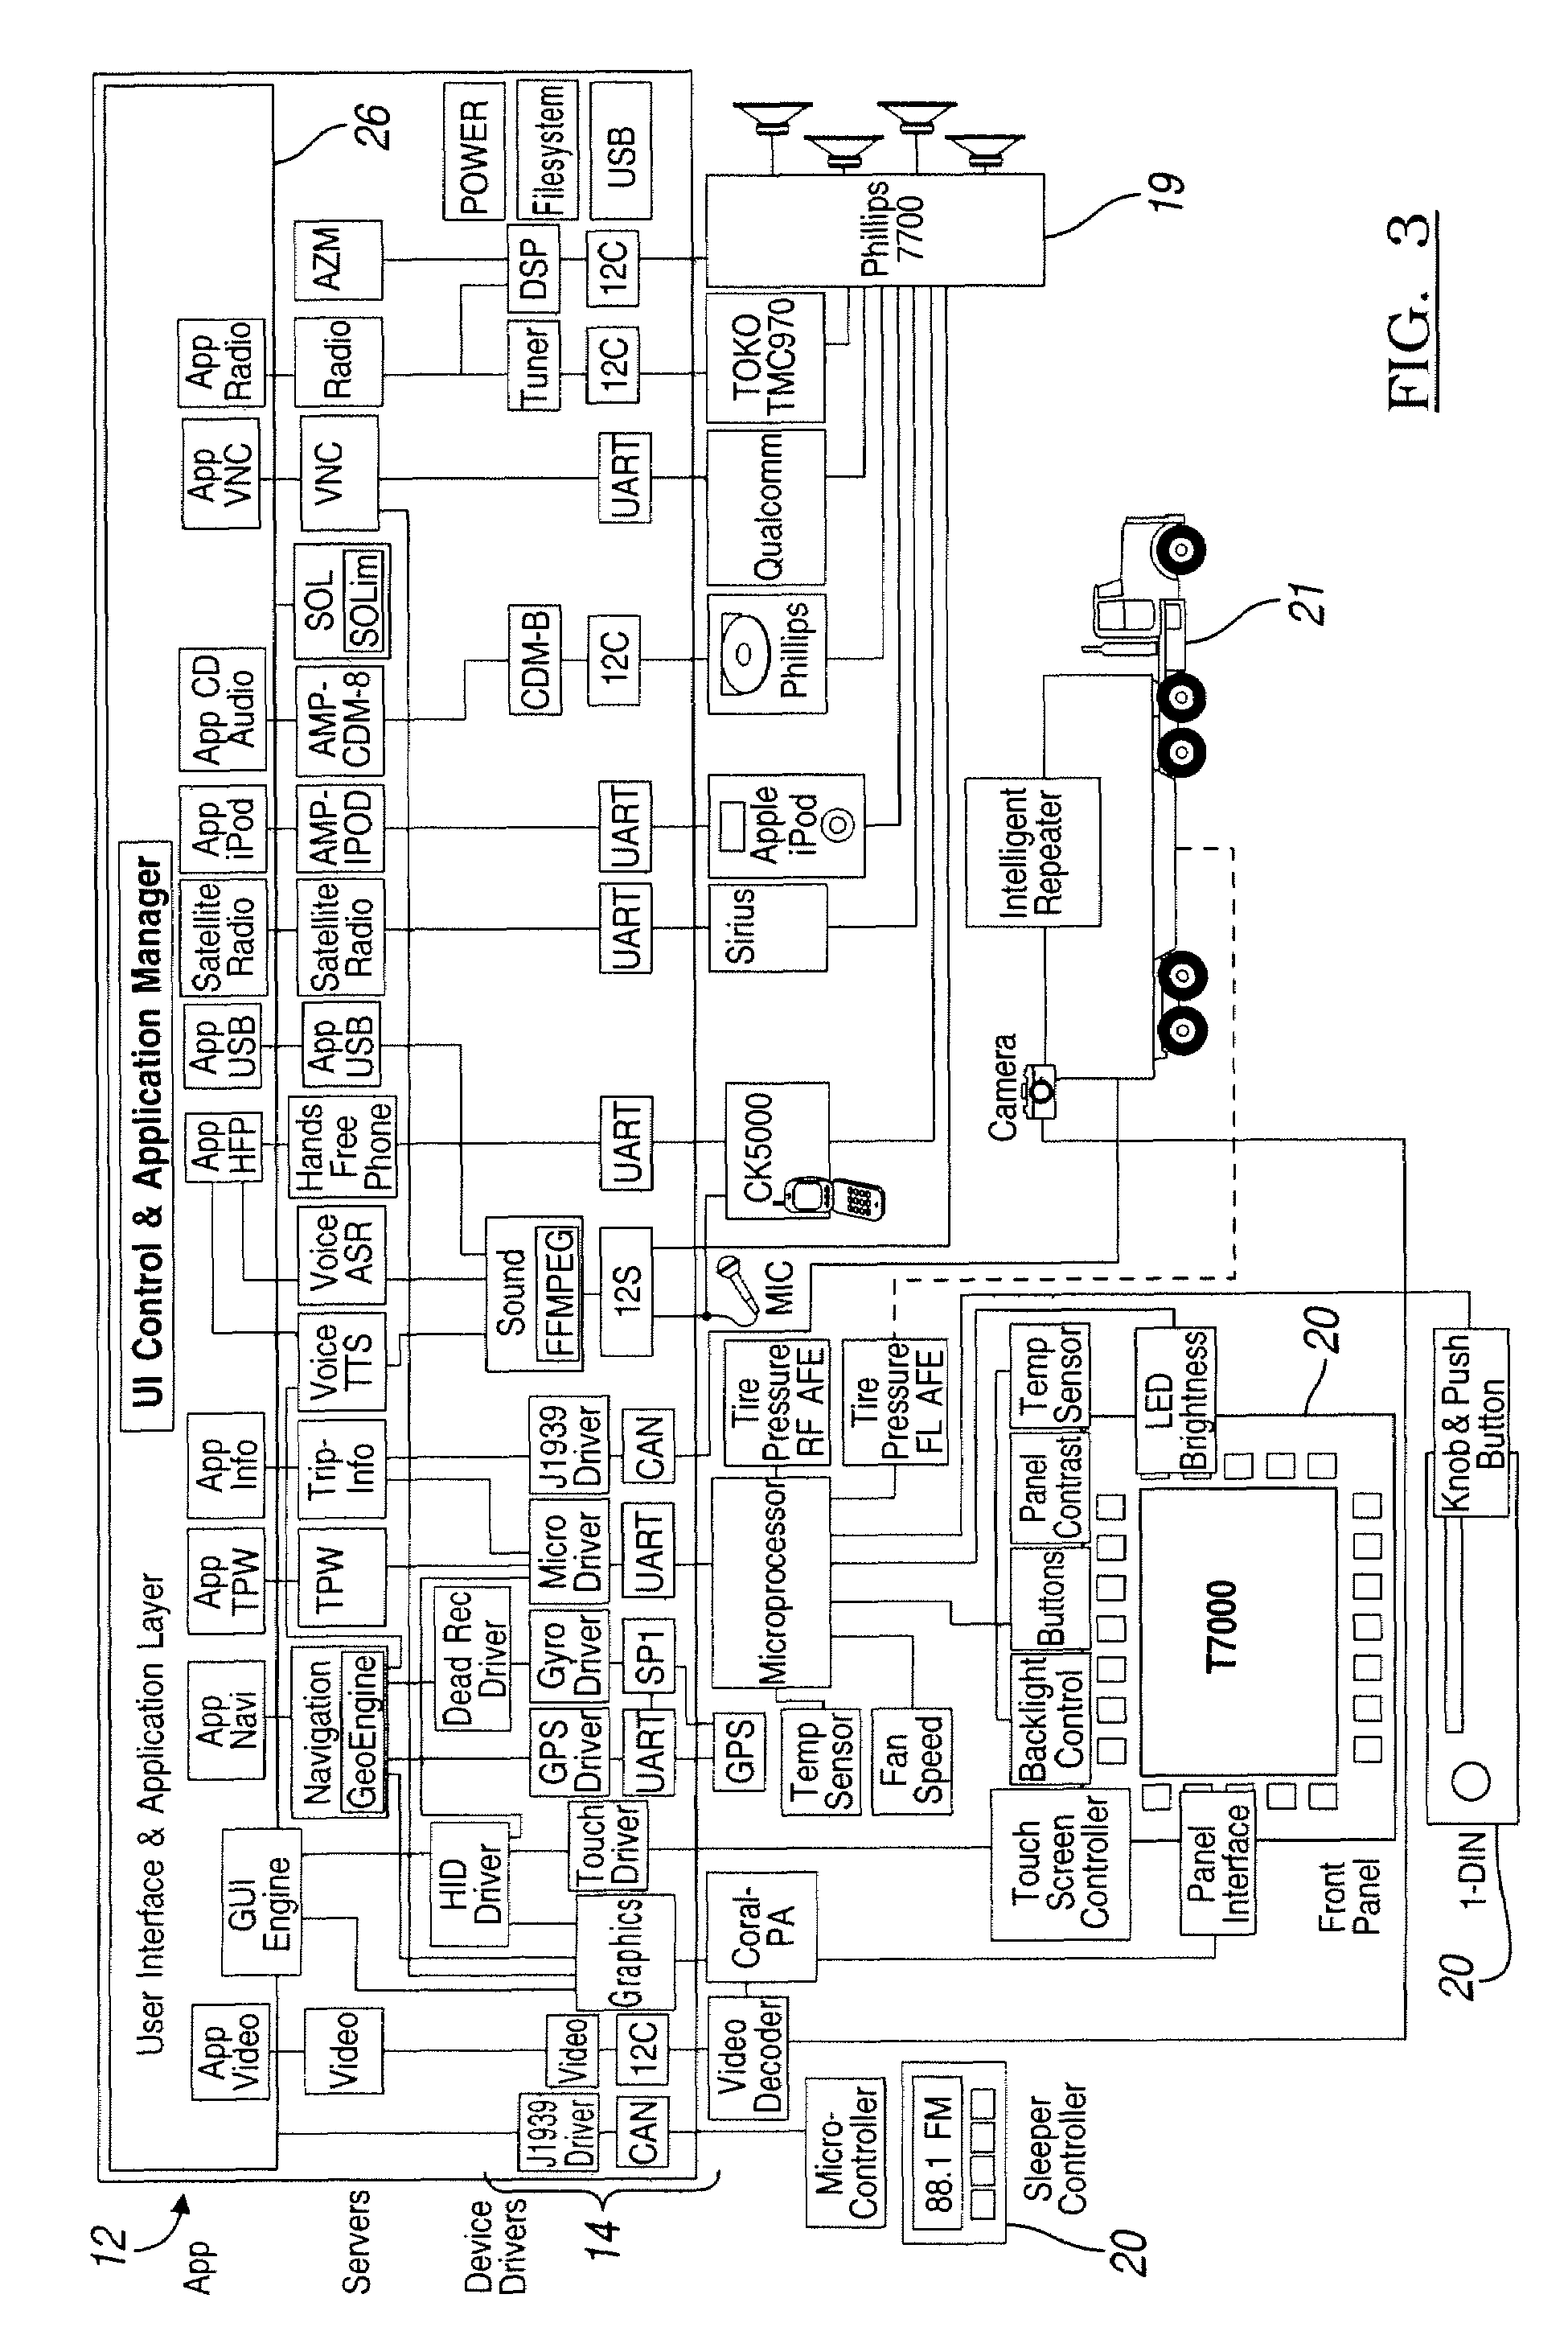 Method and system for integrating and controlling components and subsystems